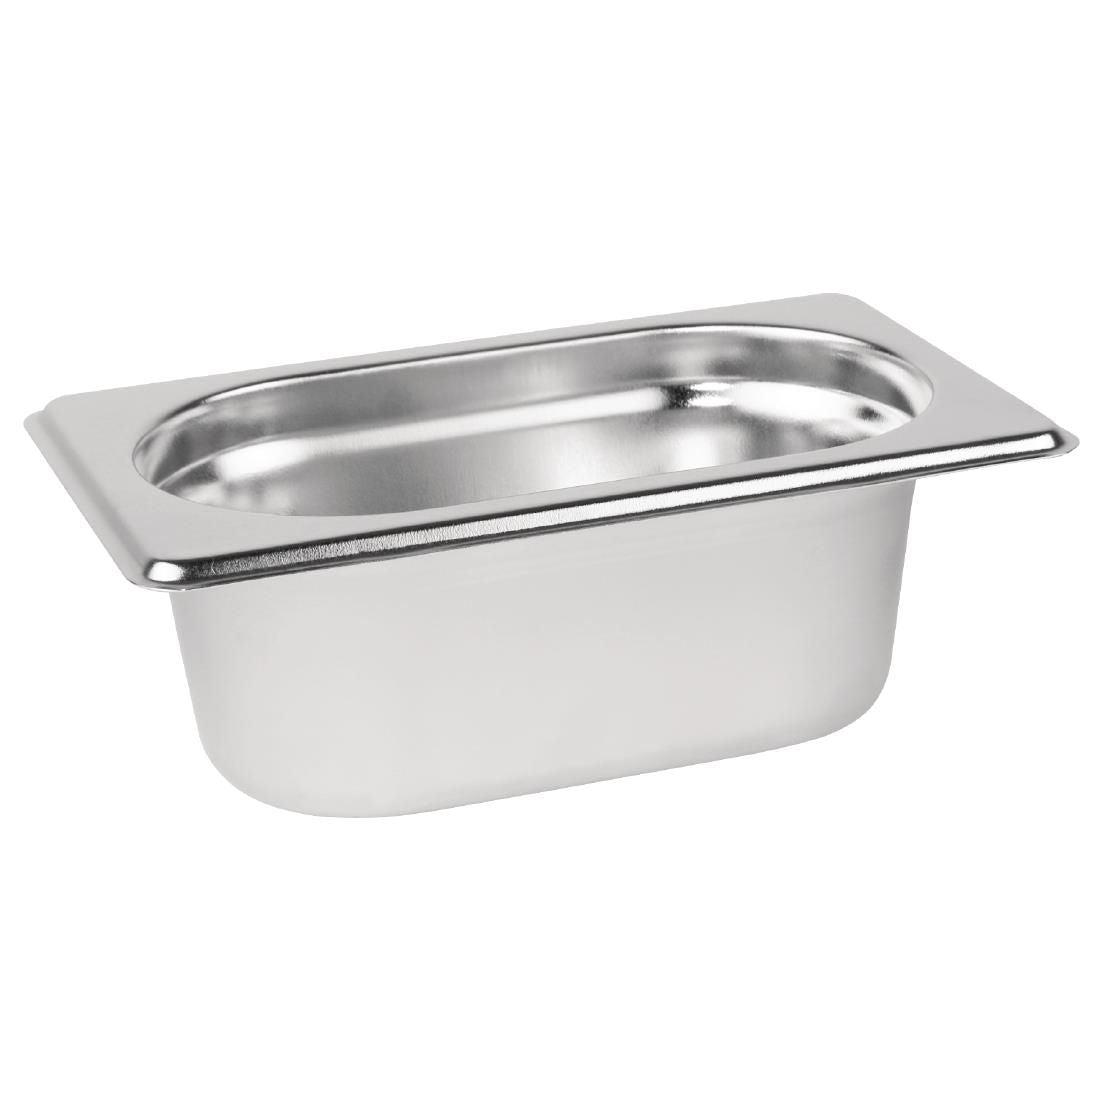 K824 Vogue Stainless Steel 1/9 Gastronorm Pan 65mm